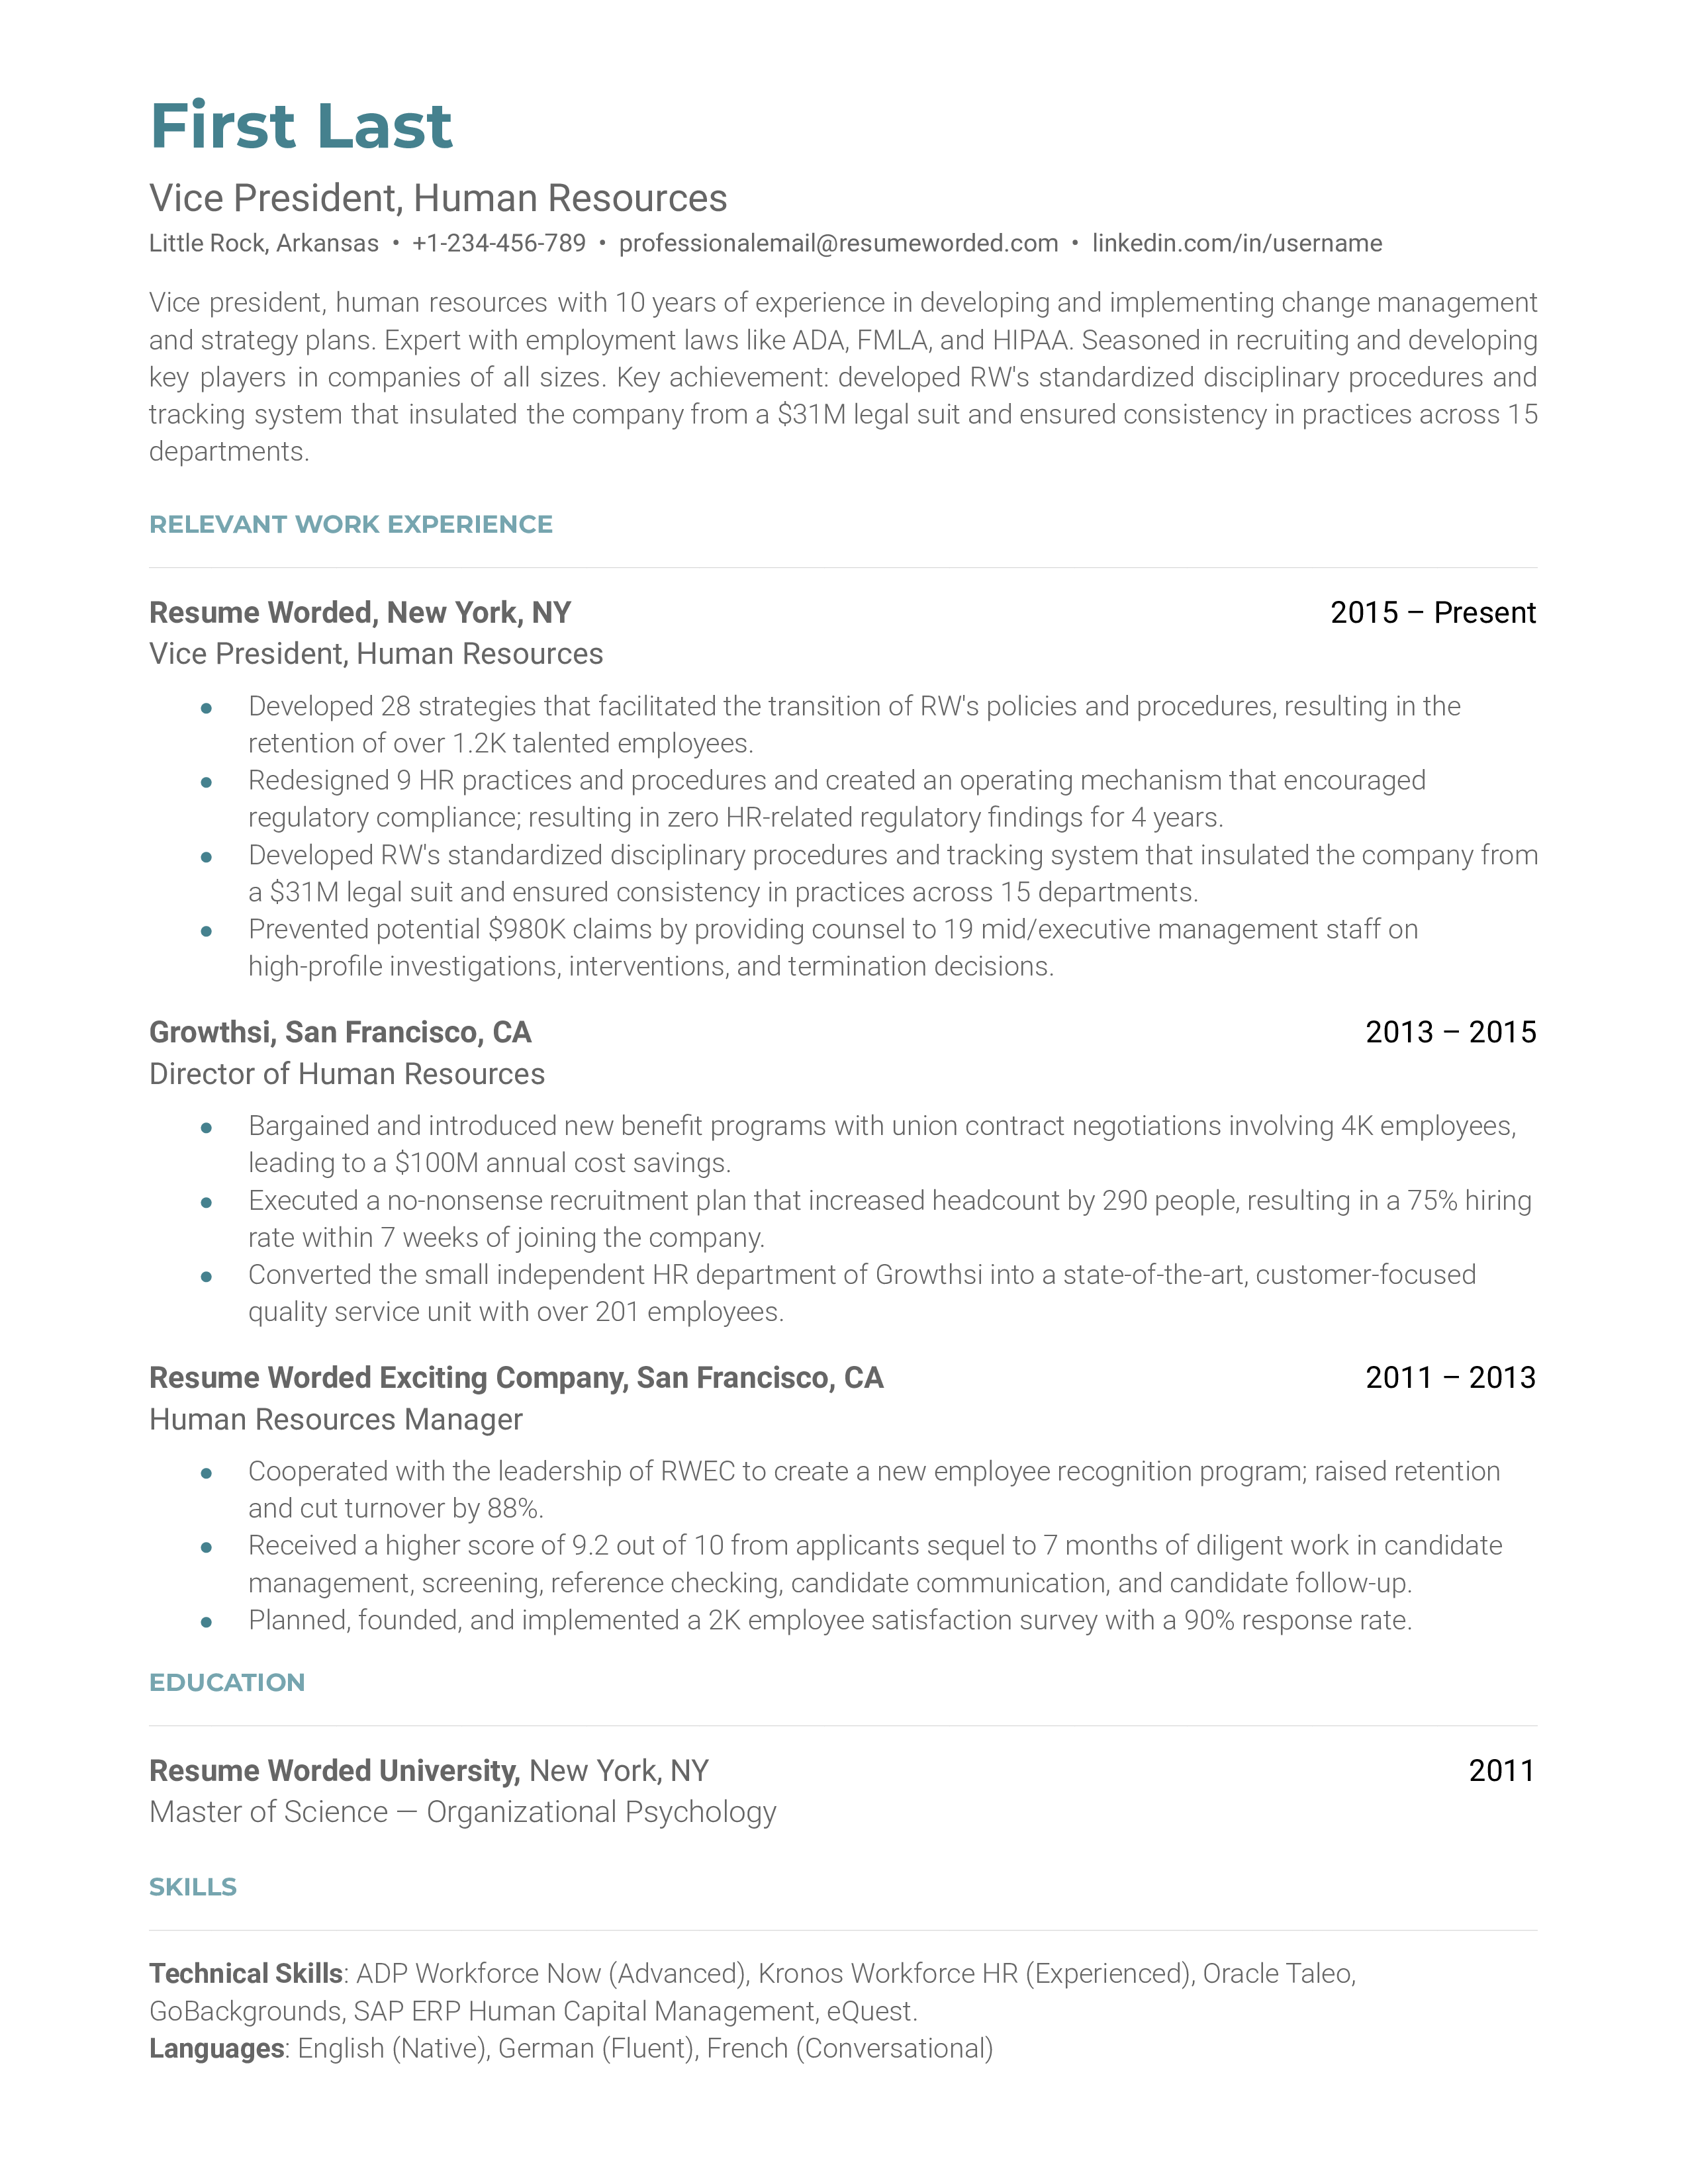 A CV for a Vice President of Human Resources showcasing experience with remote teams and data-driven decision-making.